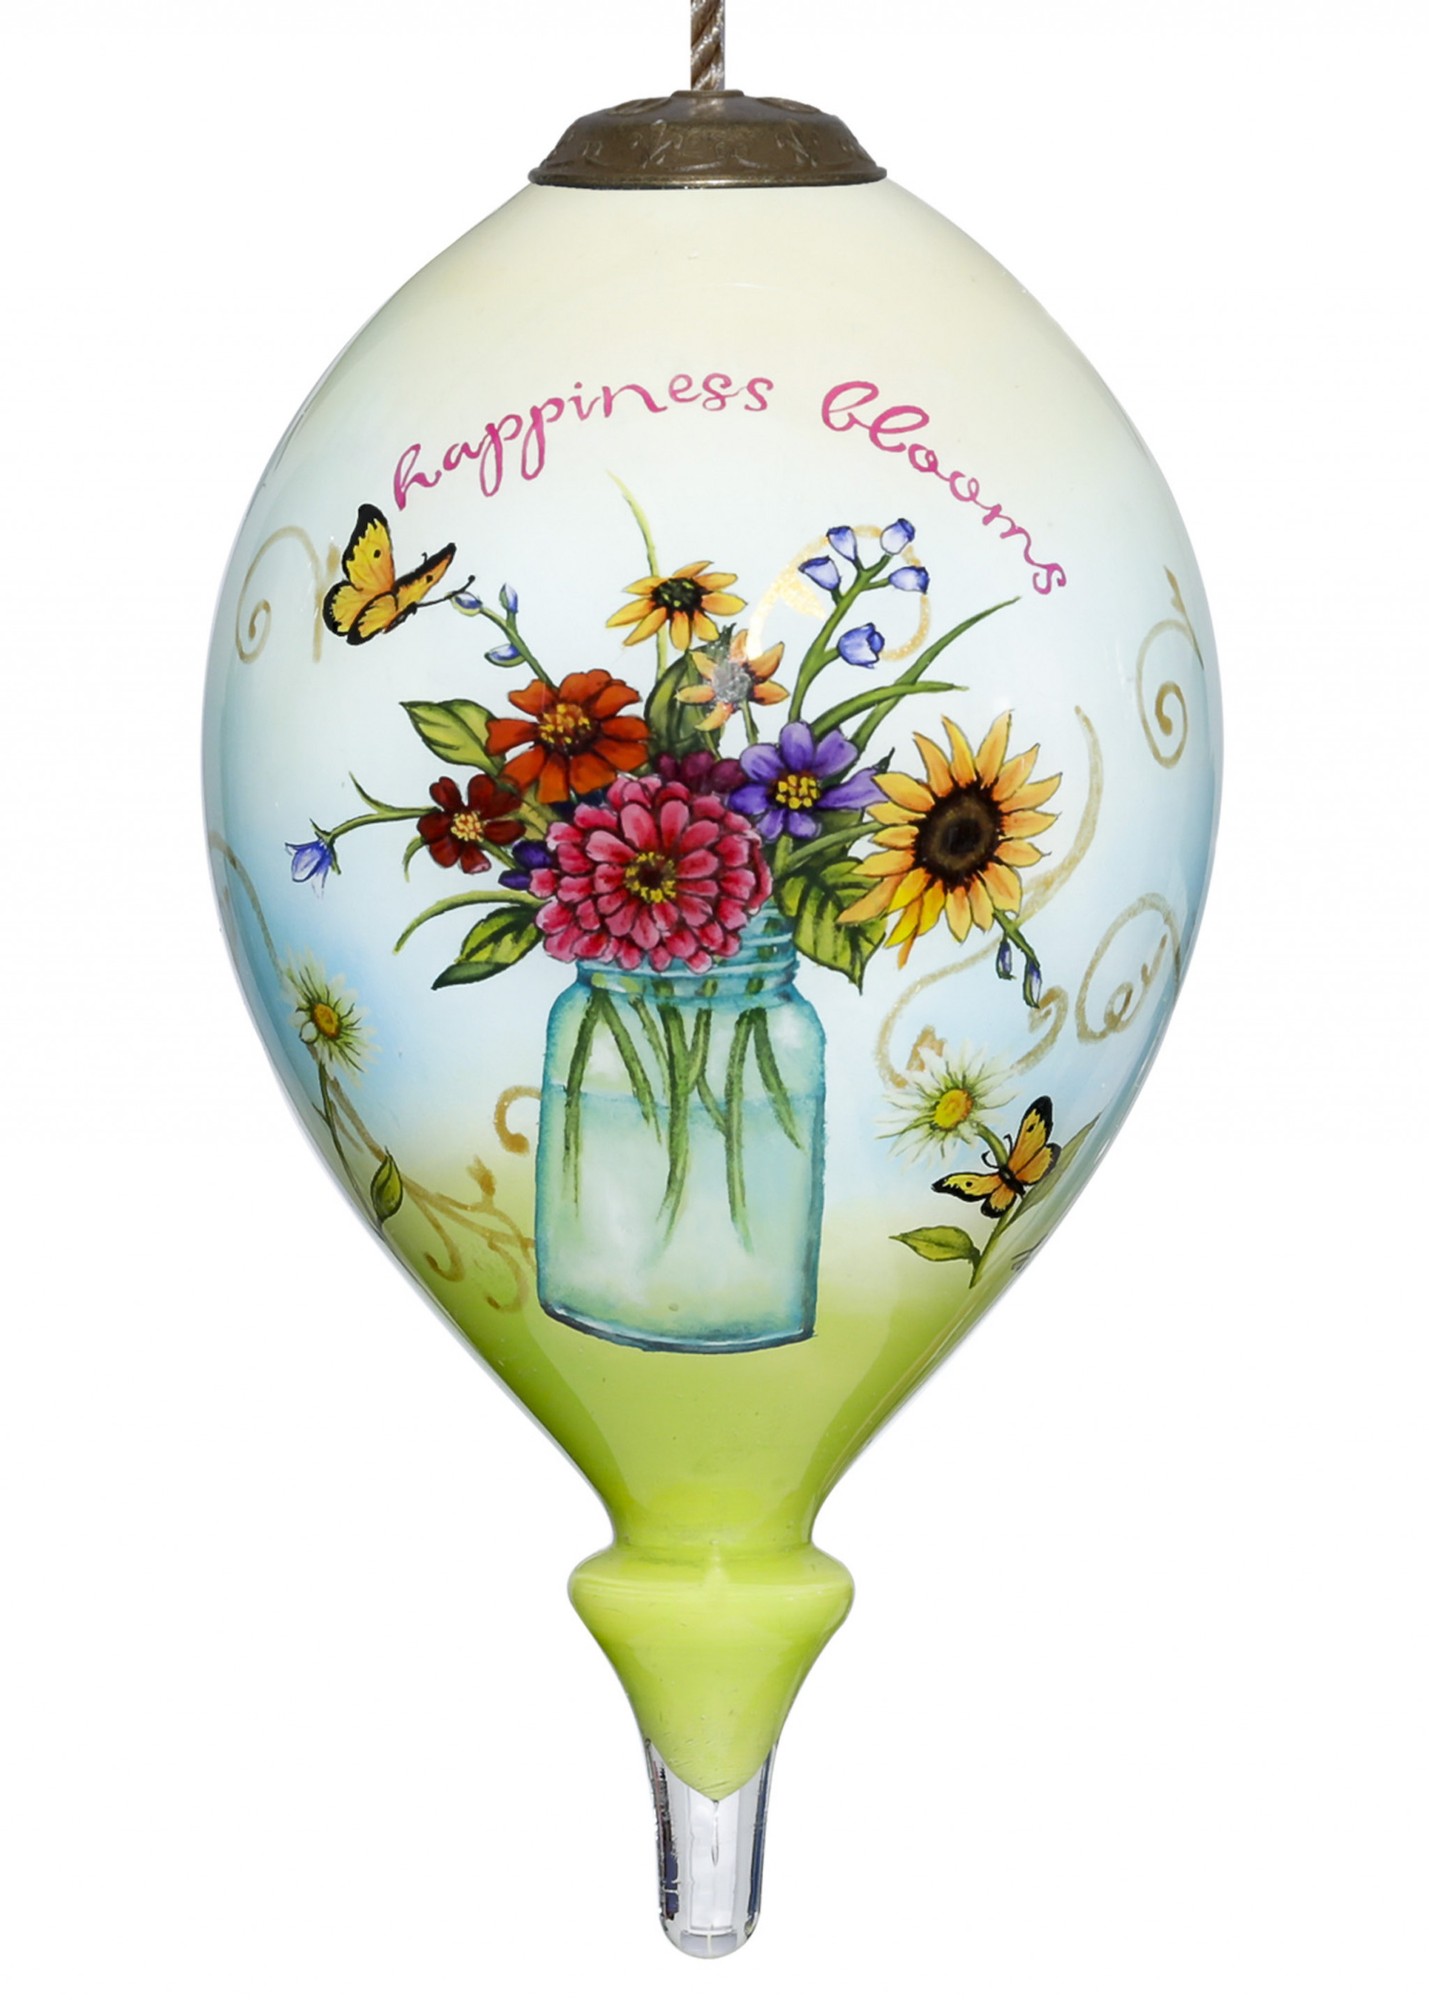 Beautiful Blooms in a Jar Hand Painted Mouth Blown Glass Ornament